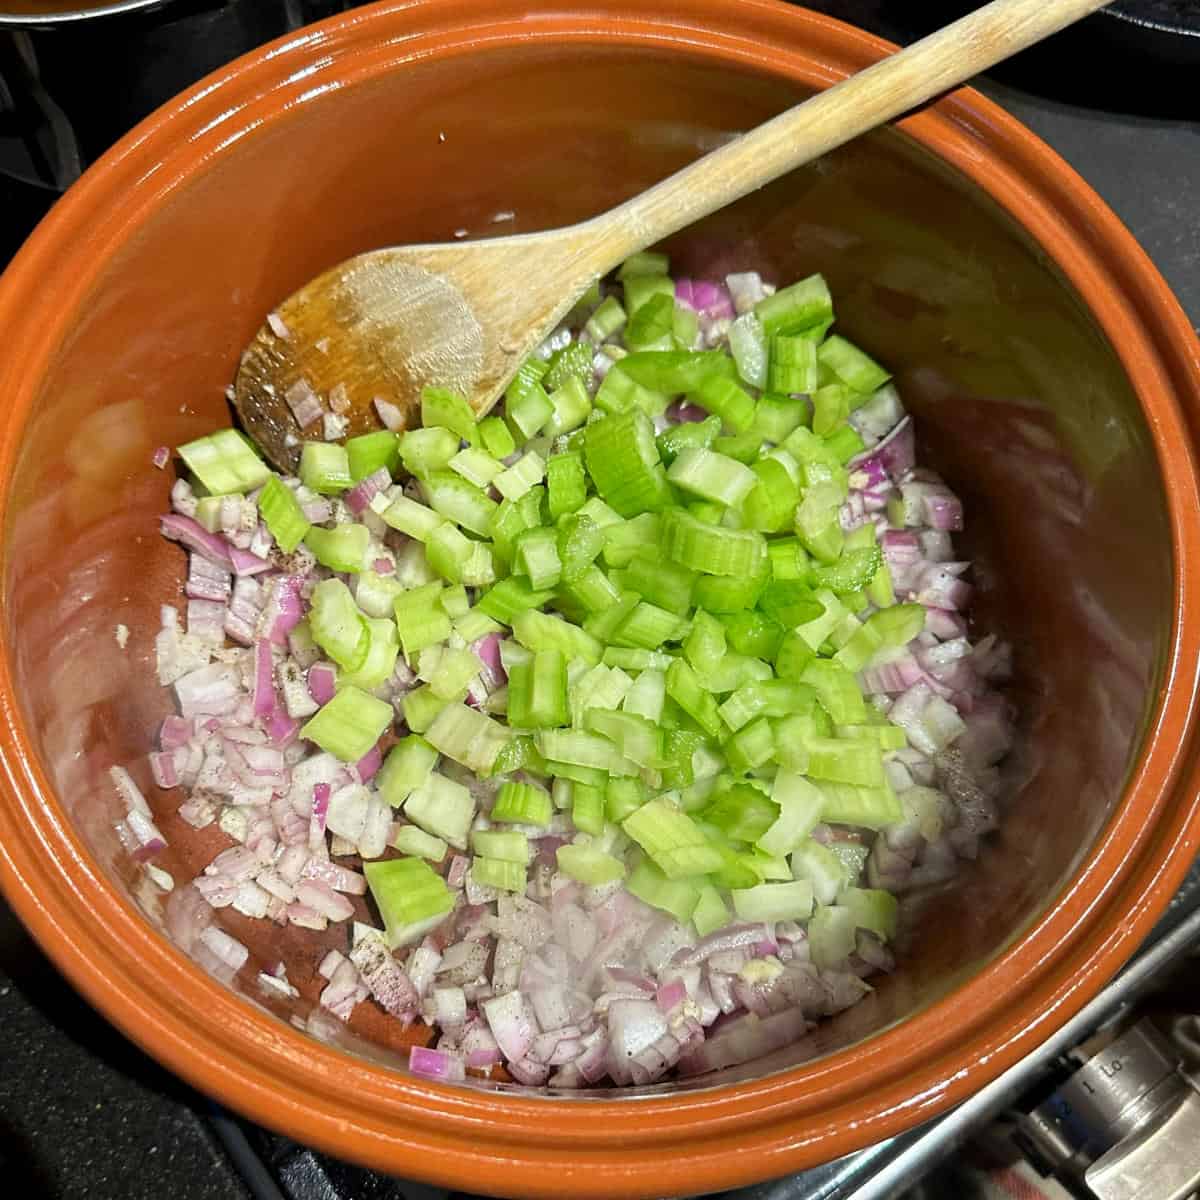 Garlic, celery and onions in pot with ladle.